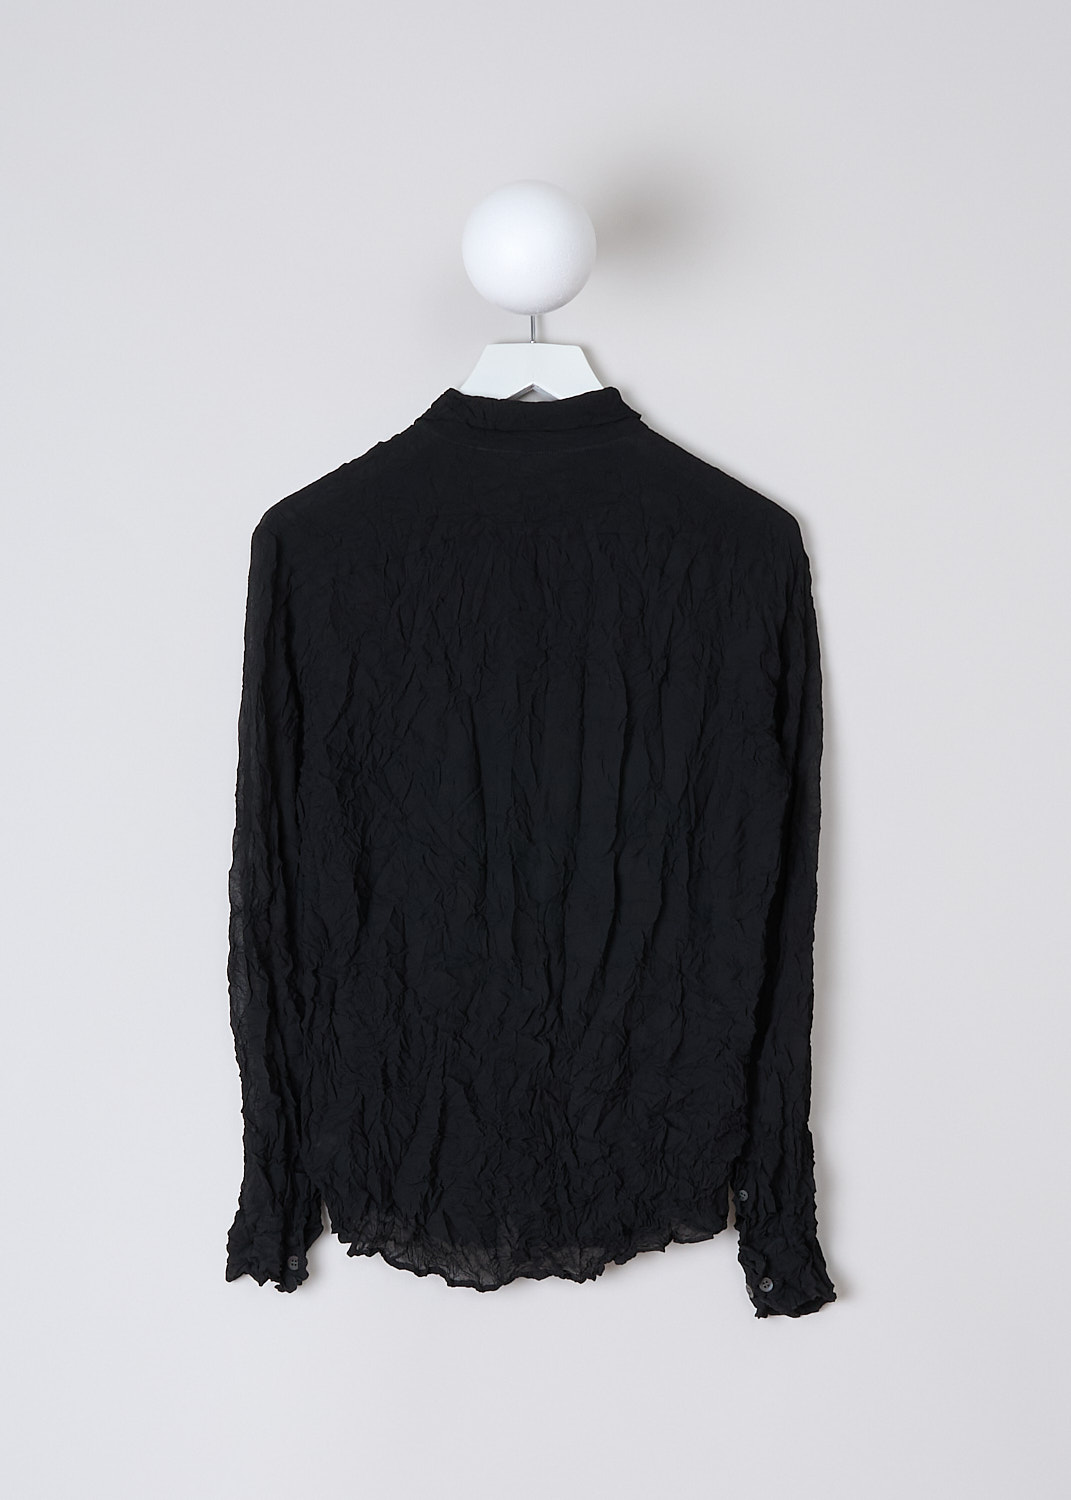 DRIES VAN NOTEN, BLACK CRUSHED BLOUSE, CRUSHED_6265_WW_SHIRT_BLACK, Black, Back, This crushed black blouse has a spread collar and a front button closure. The blouse is slightly see-though. The long sleeves have buttoned cuffs. 